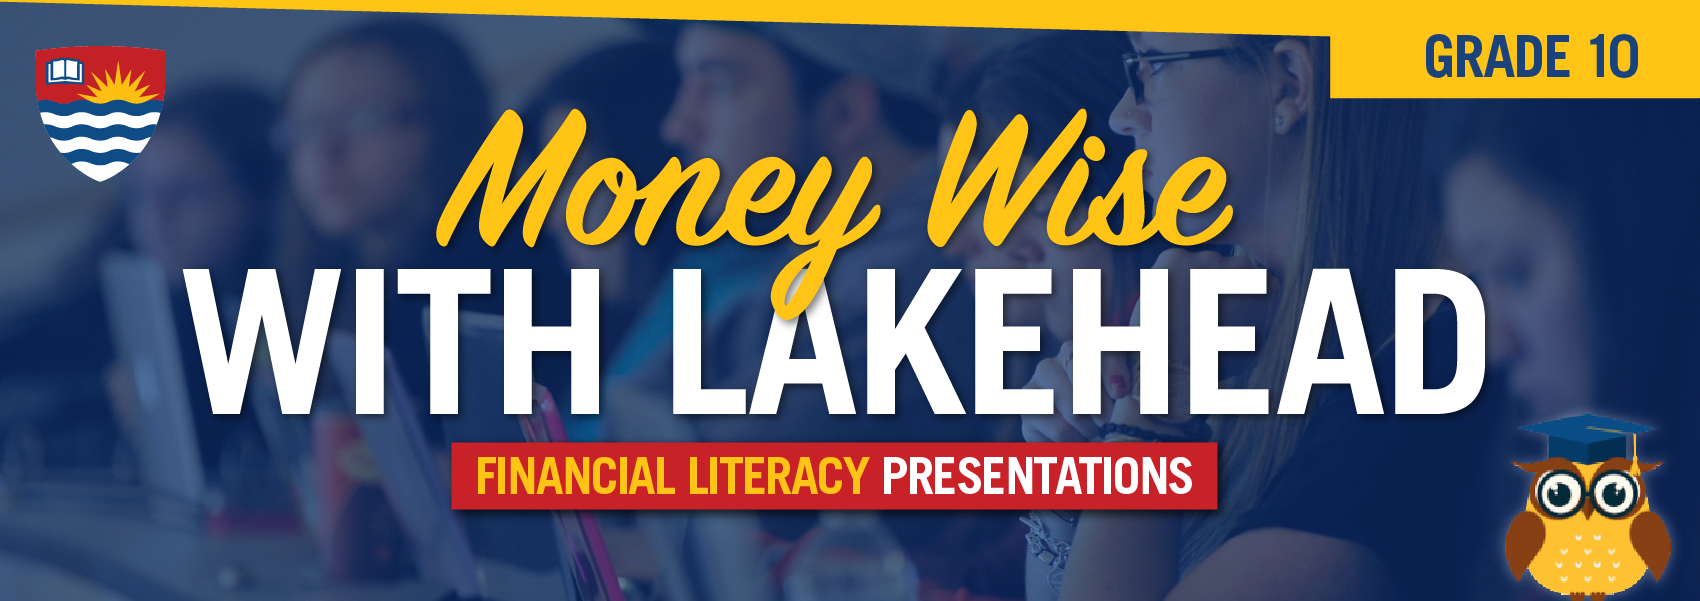 Money wise with lakehead: financial literacy presentations